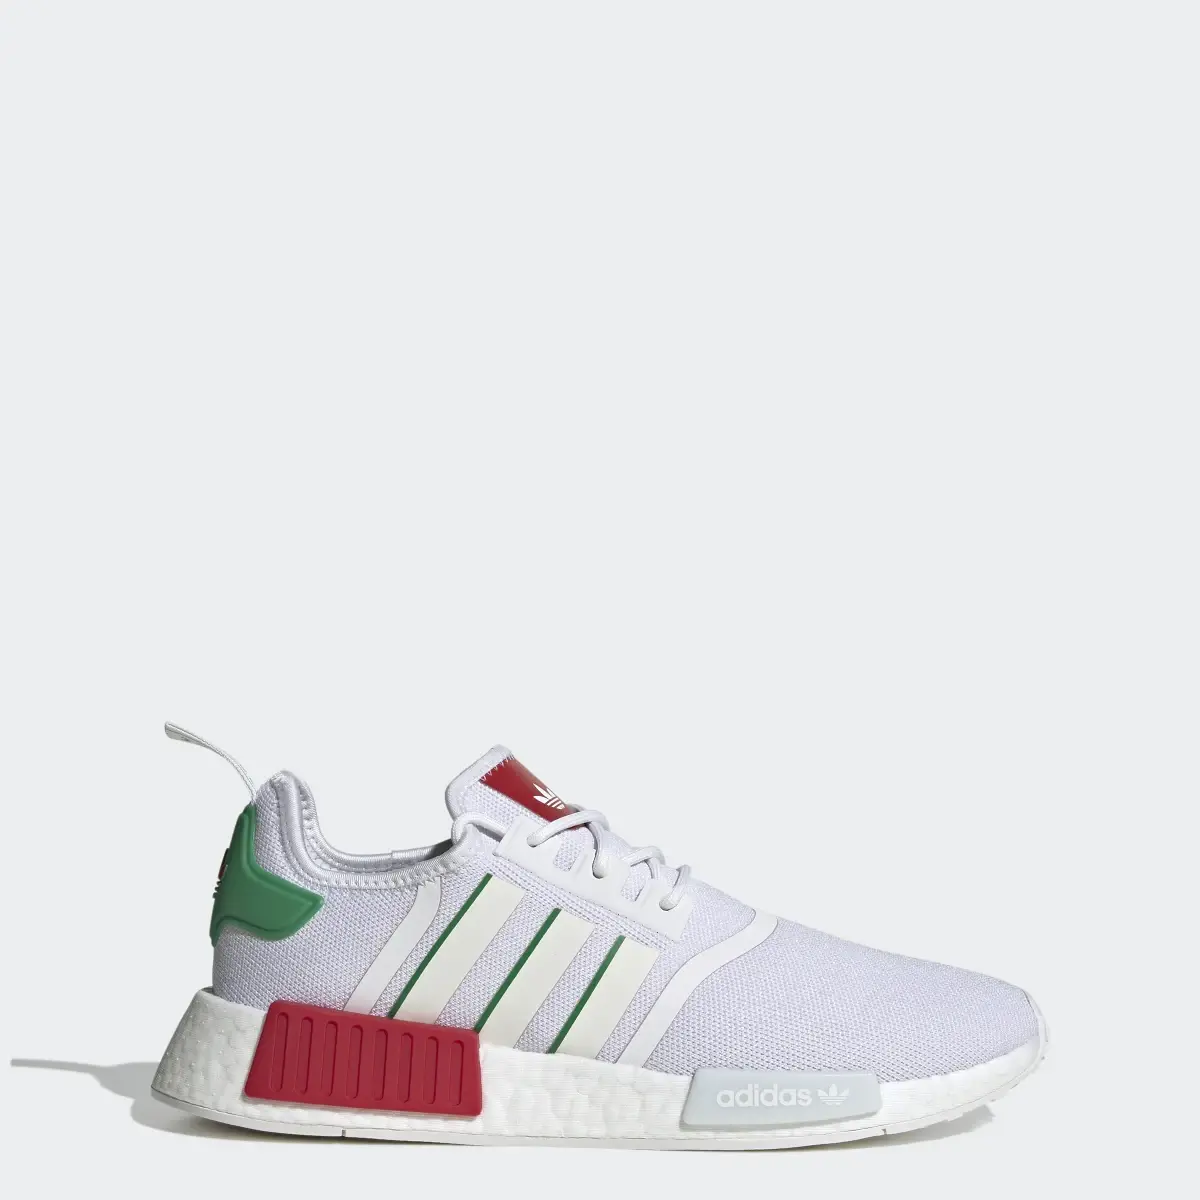 Adidas NMD_R1 Shoes. 1